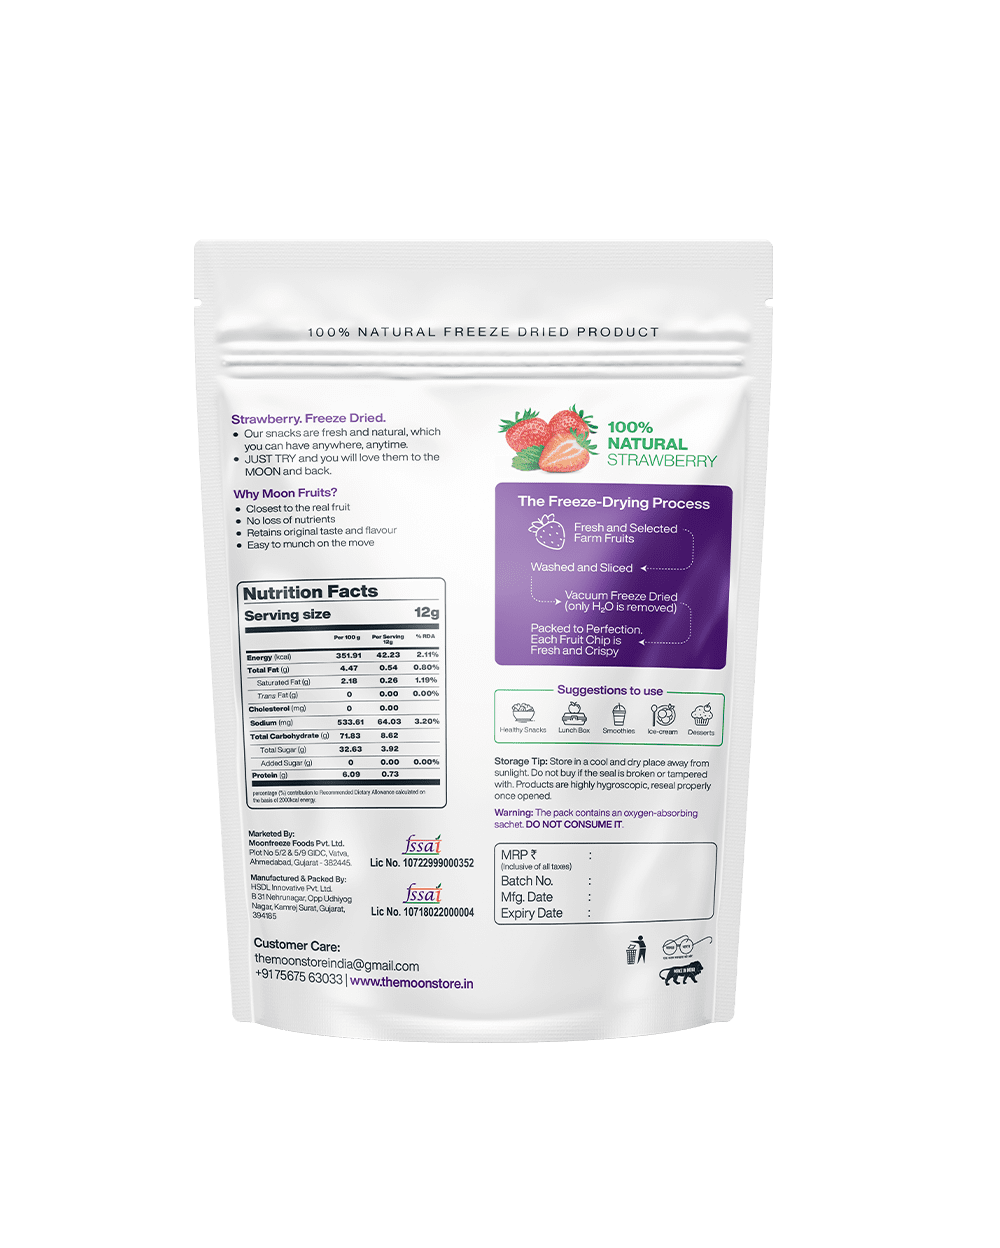 A pack of Moon Freeze Dried Strawberry + Blueberry from MOONFREEZE FOODS PRIVATE LIMITED with nutritional information and product details on the label, offering sophisticated snacking with nutritional benefits.